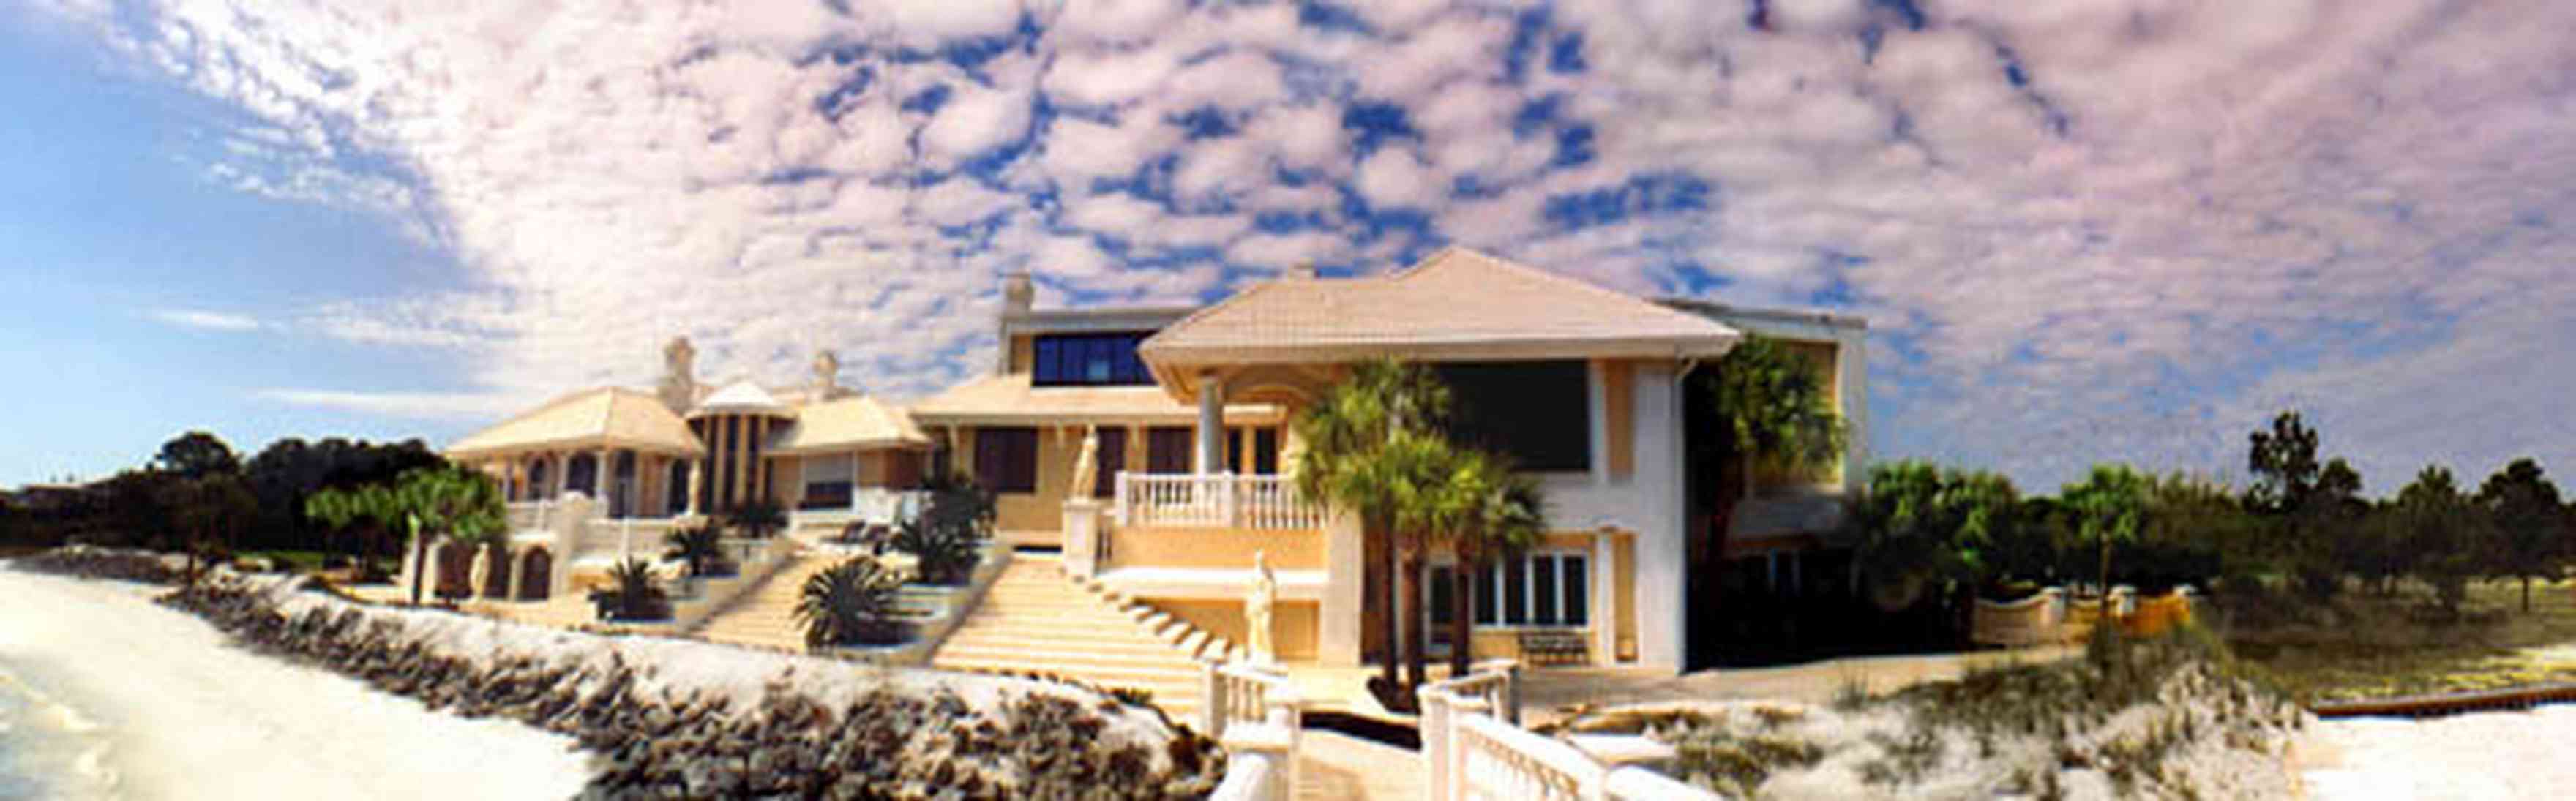 Gulf-Breeze:-Levin-House_01a.jpg:  cirrus clouds, mansion, italienate mansion, beach, bay, greek statues, palm trees